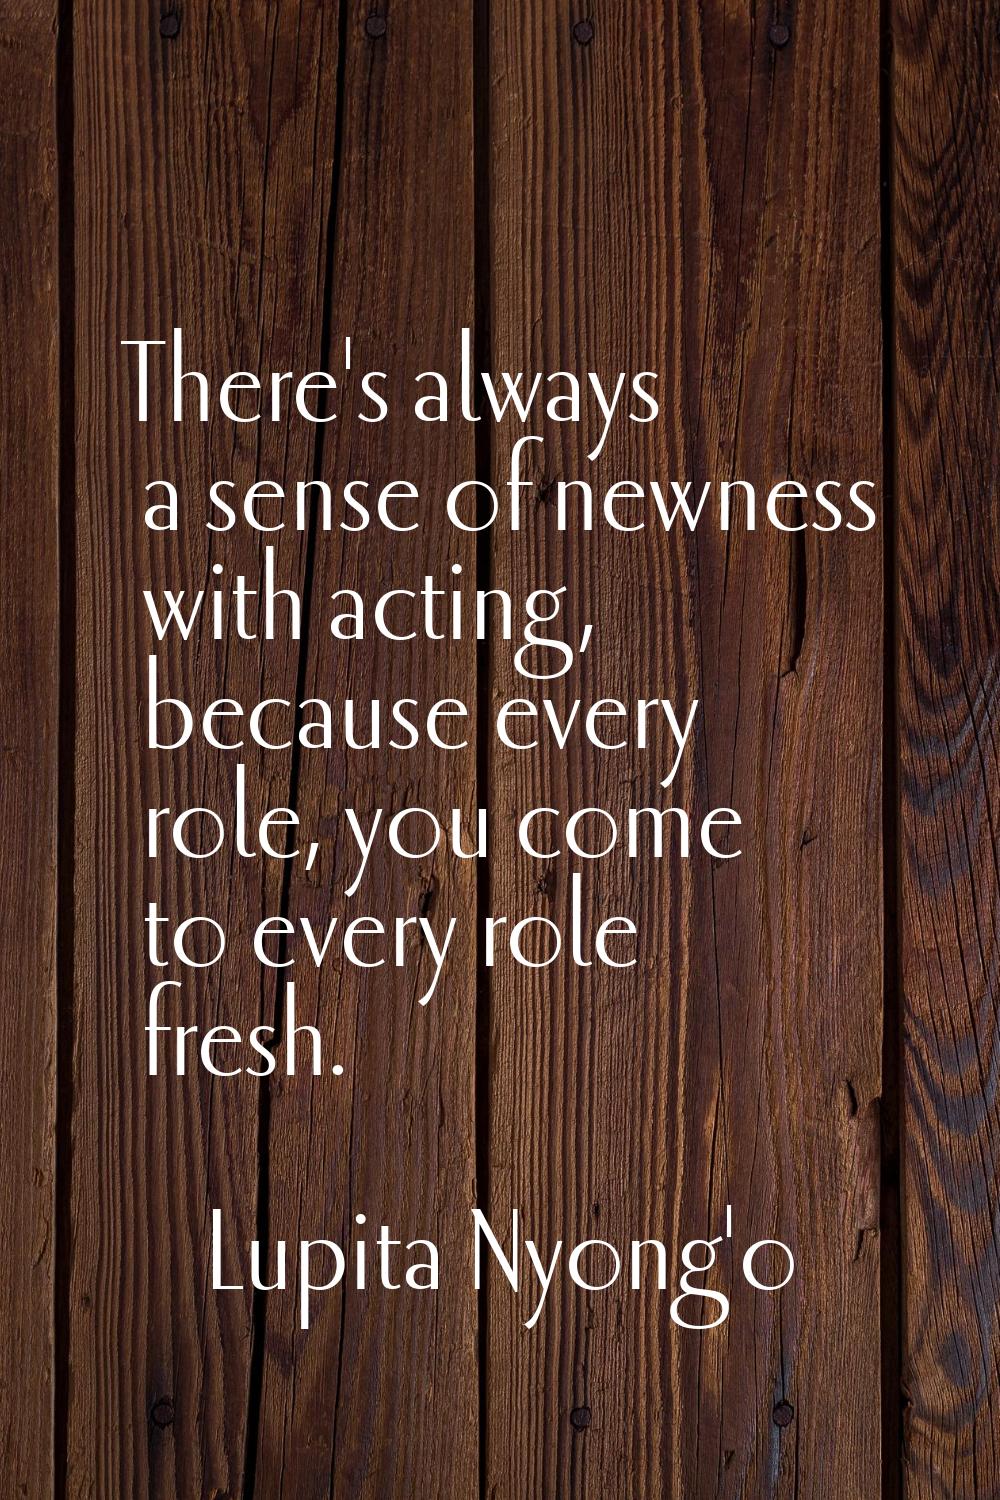 There's always a sense of newness with acting, because every role, you come to every role fresh.